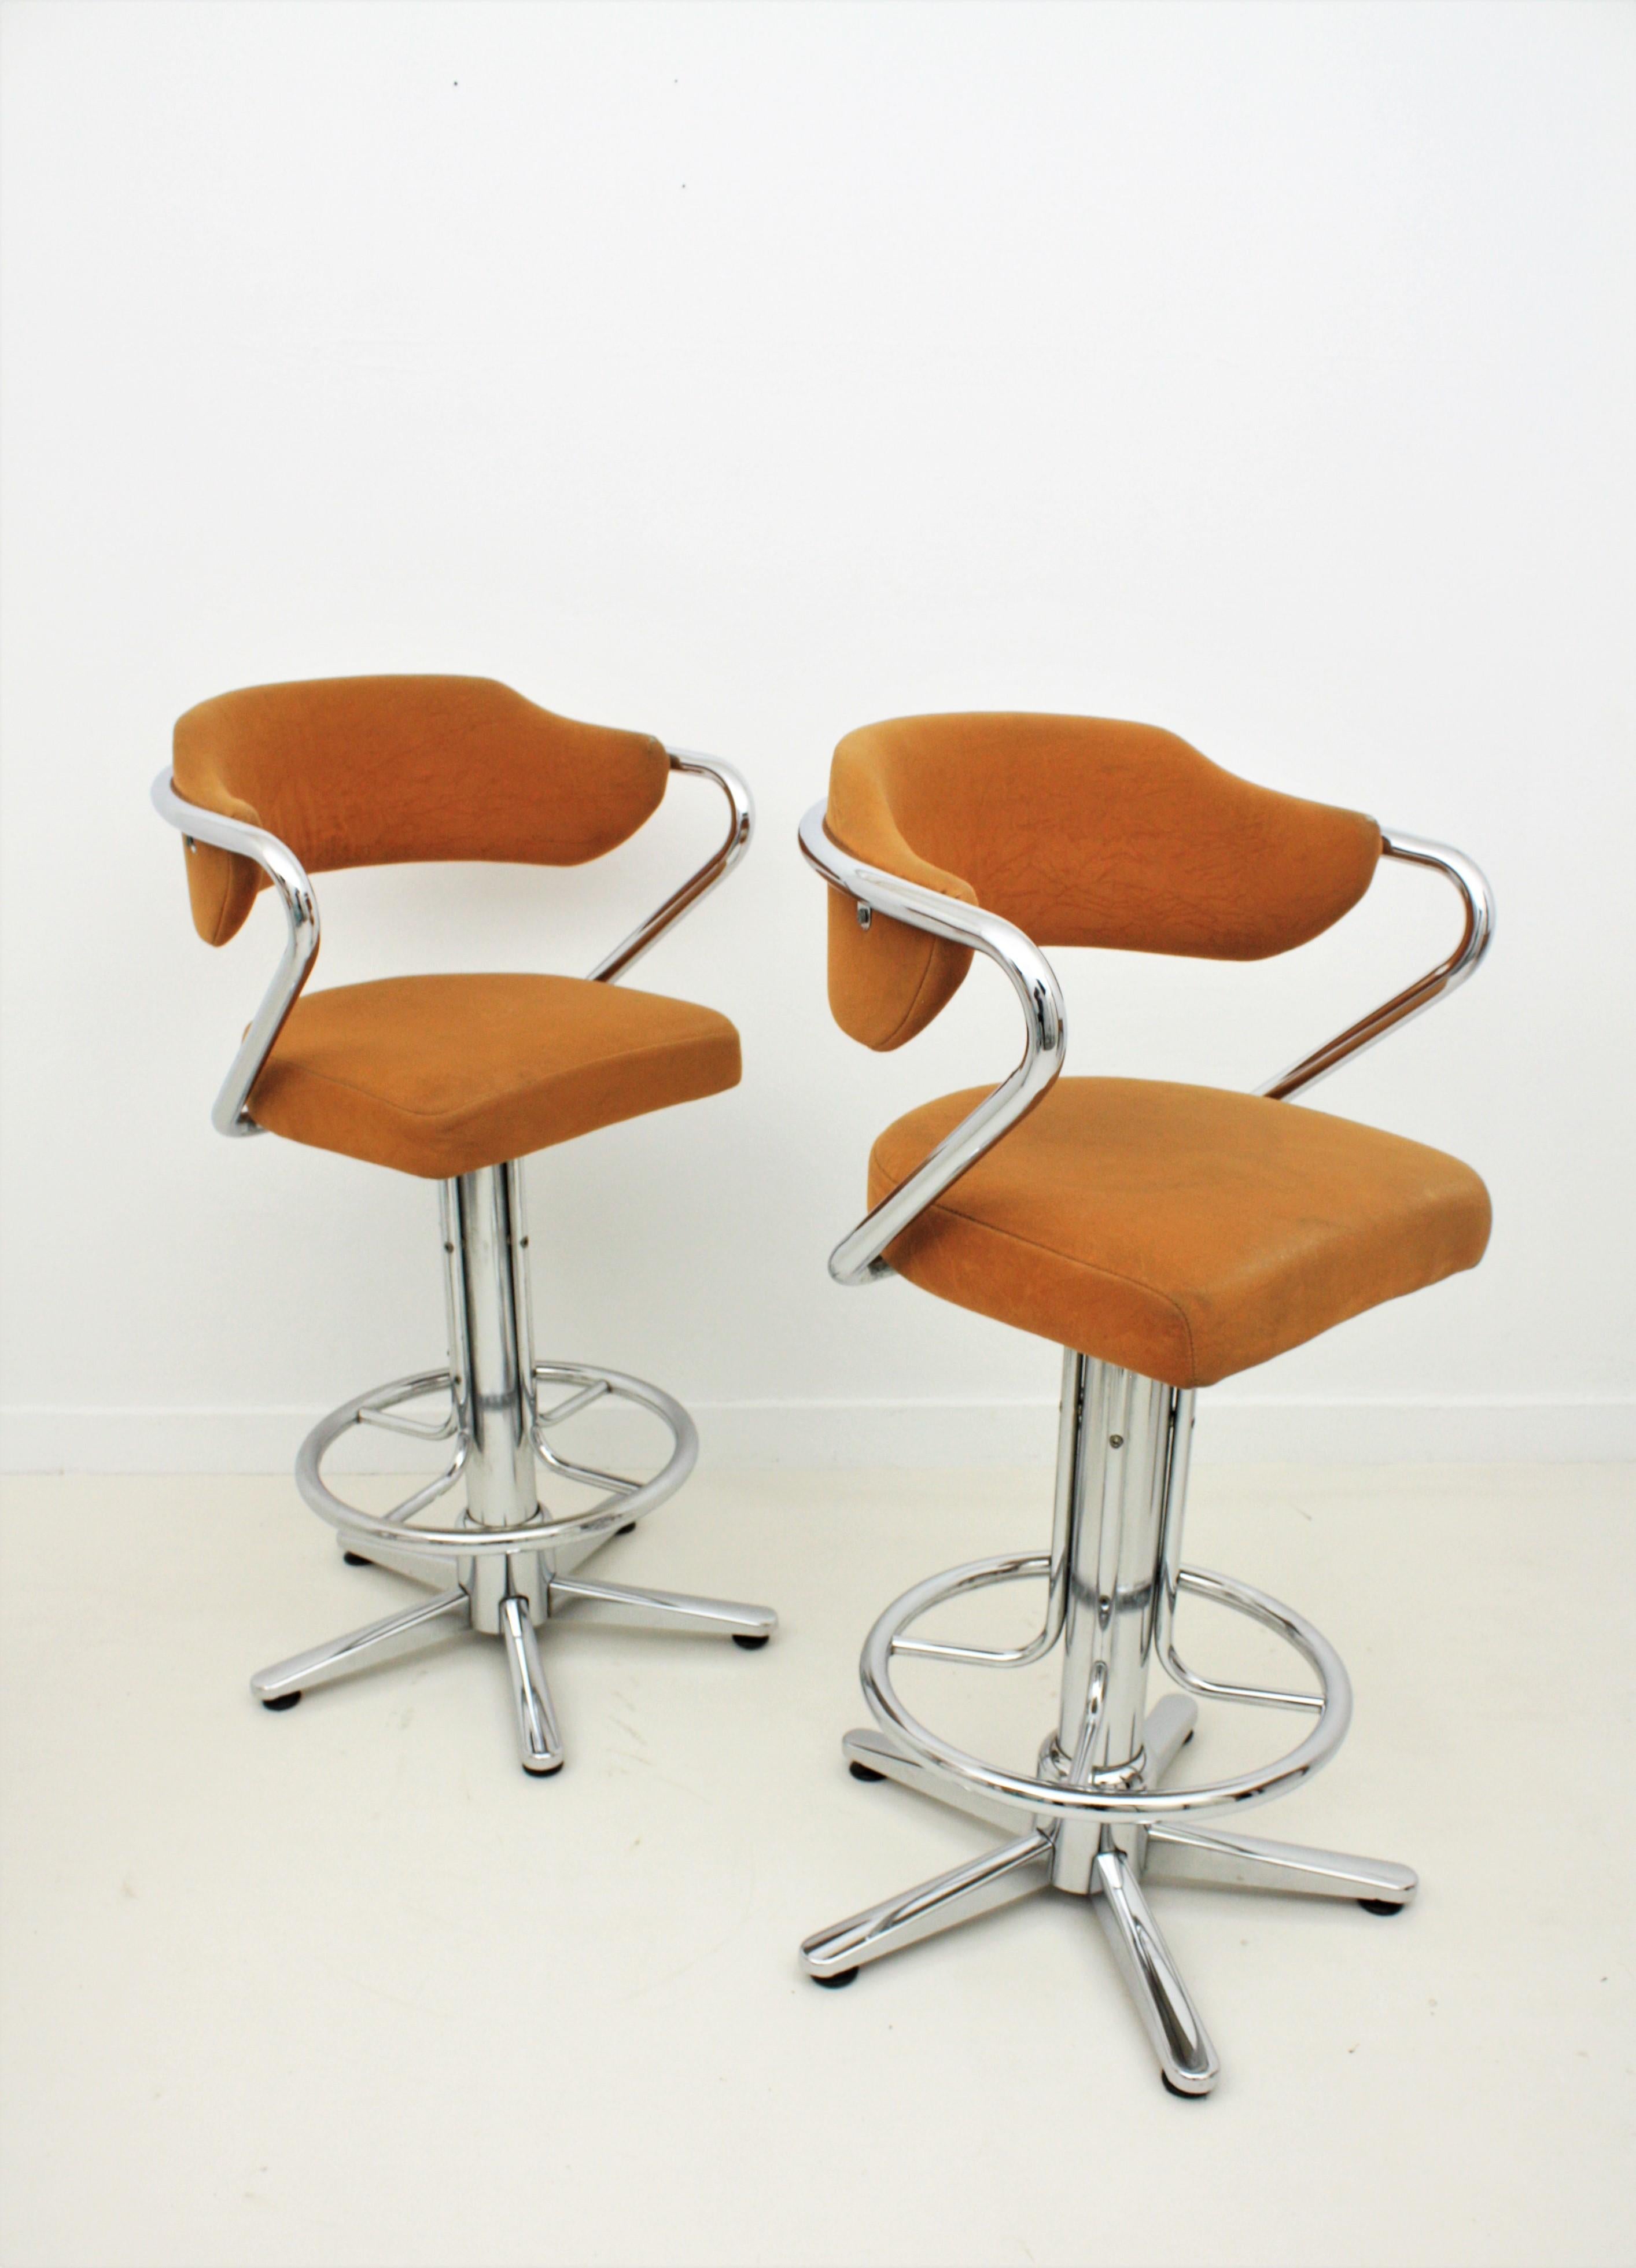 Post-Modern Set of Four Steel Swivel Bar Stools with Arms, Spain, 1970s